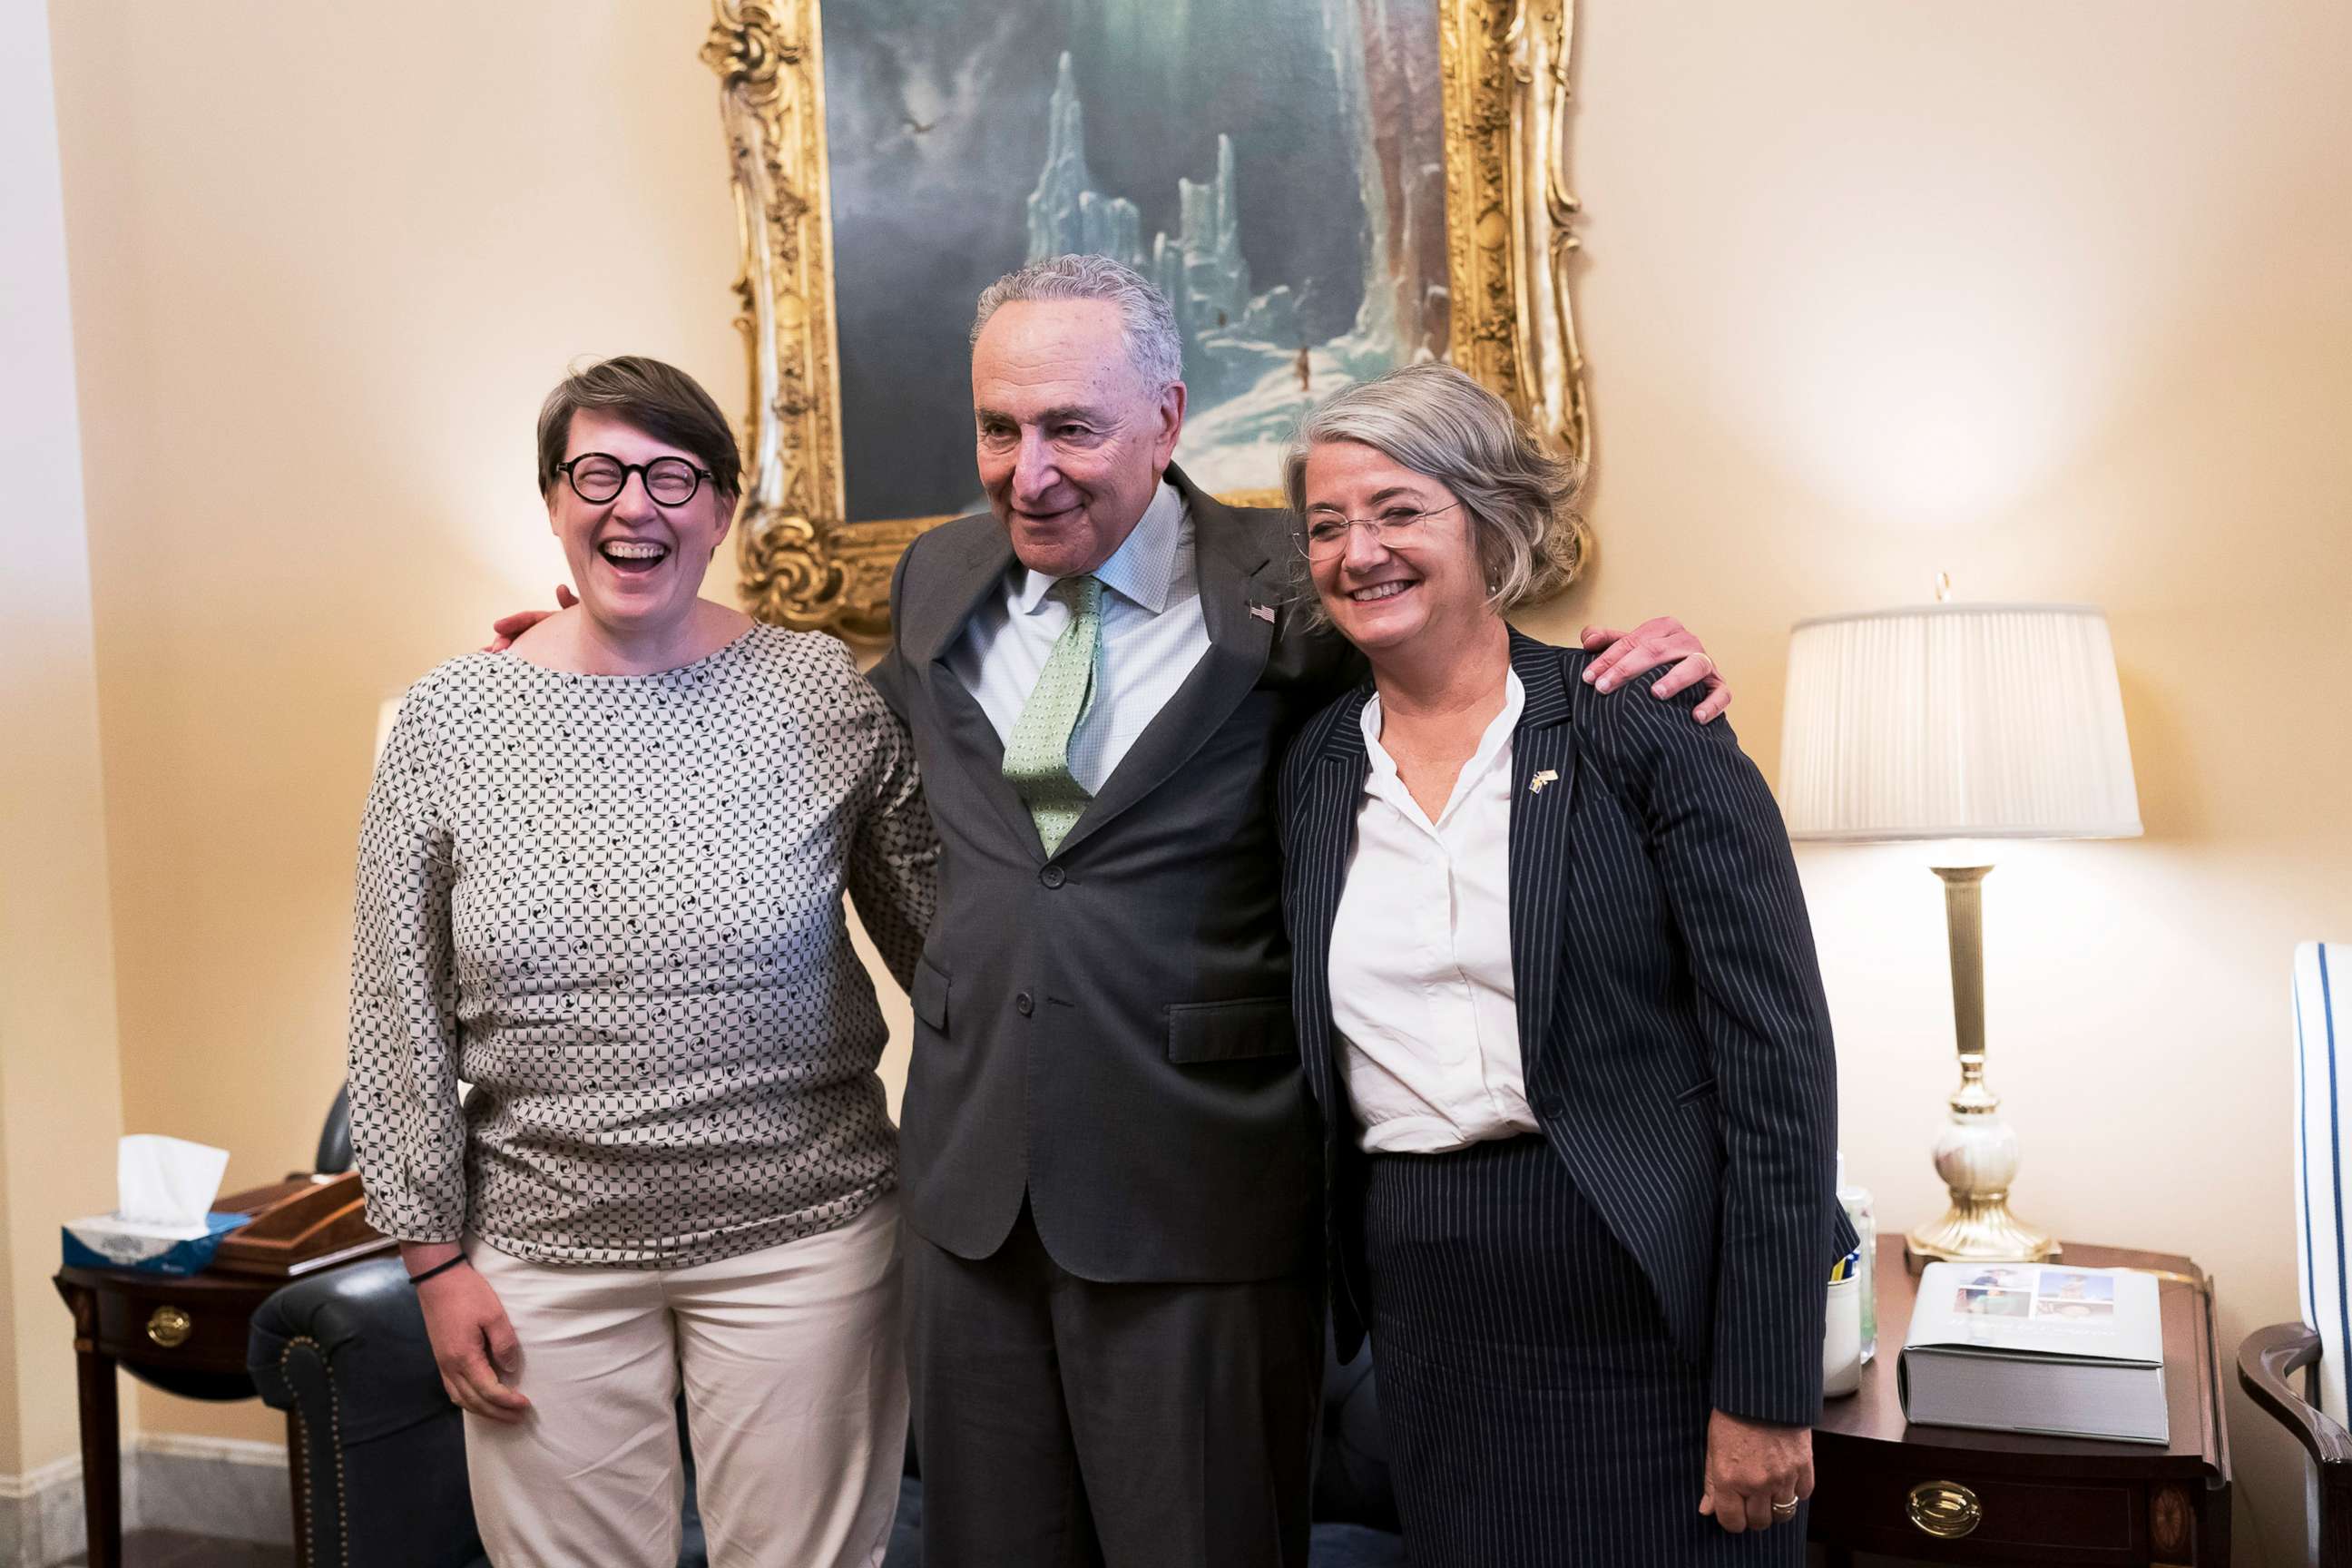 PHOTO: Senate Majority Leader Chuck Schumer, flanked by Paivi Nevala, minister counselor of the Finnish Embassy and Karin Olofsdotter, Sweden's ambassador, welcomes diplomats from Sweden and Finland in Washington, Aug. 3, 2022.